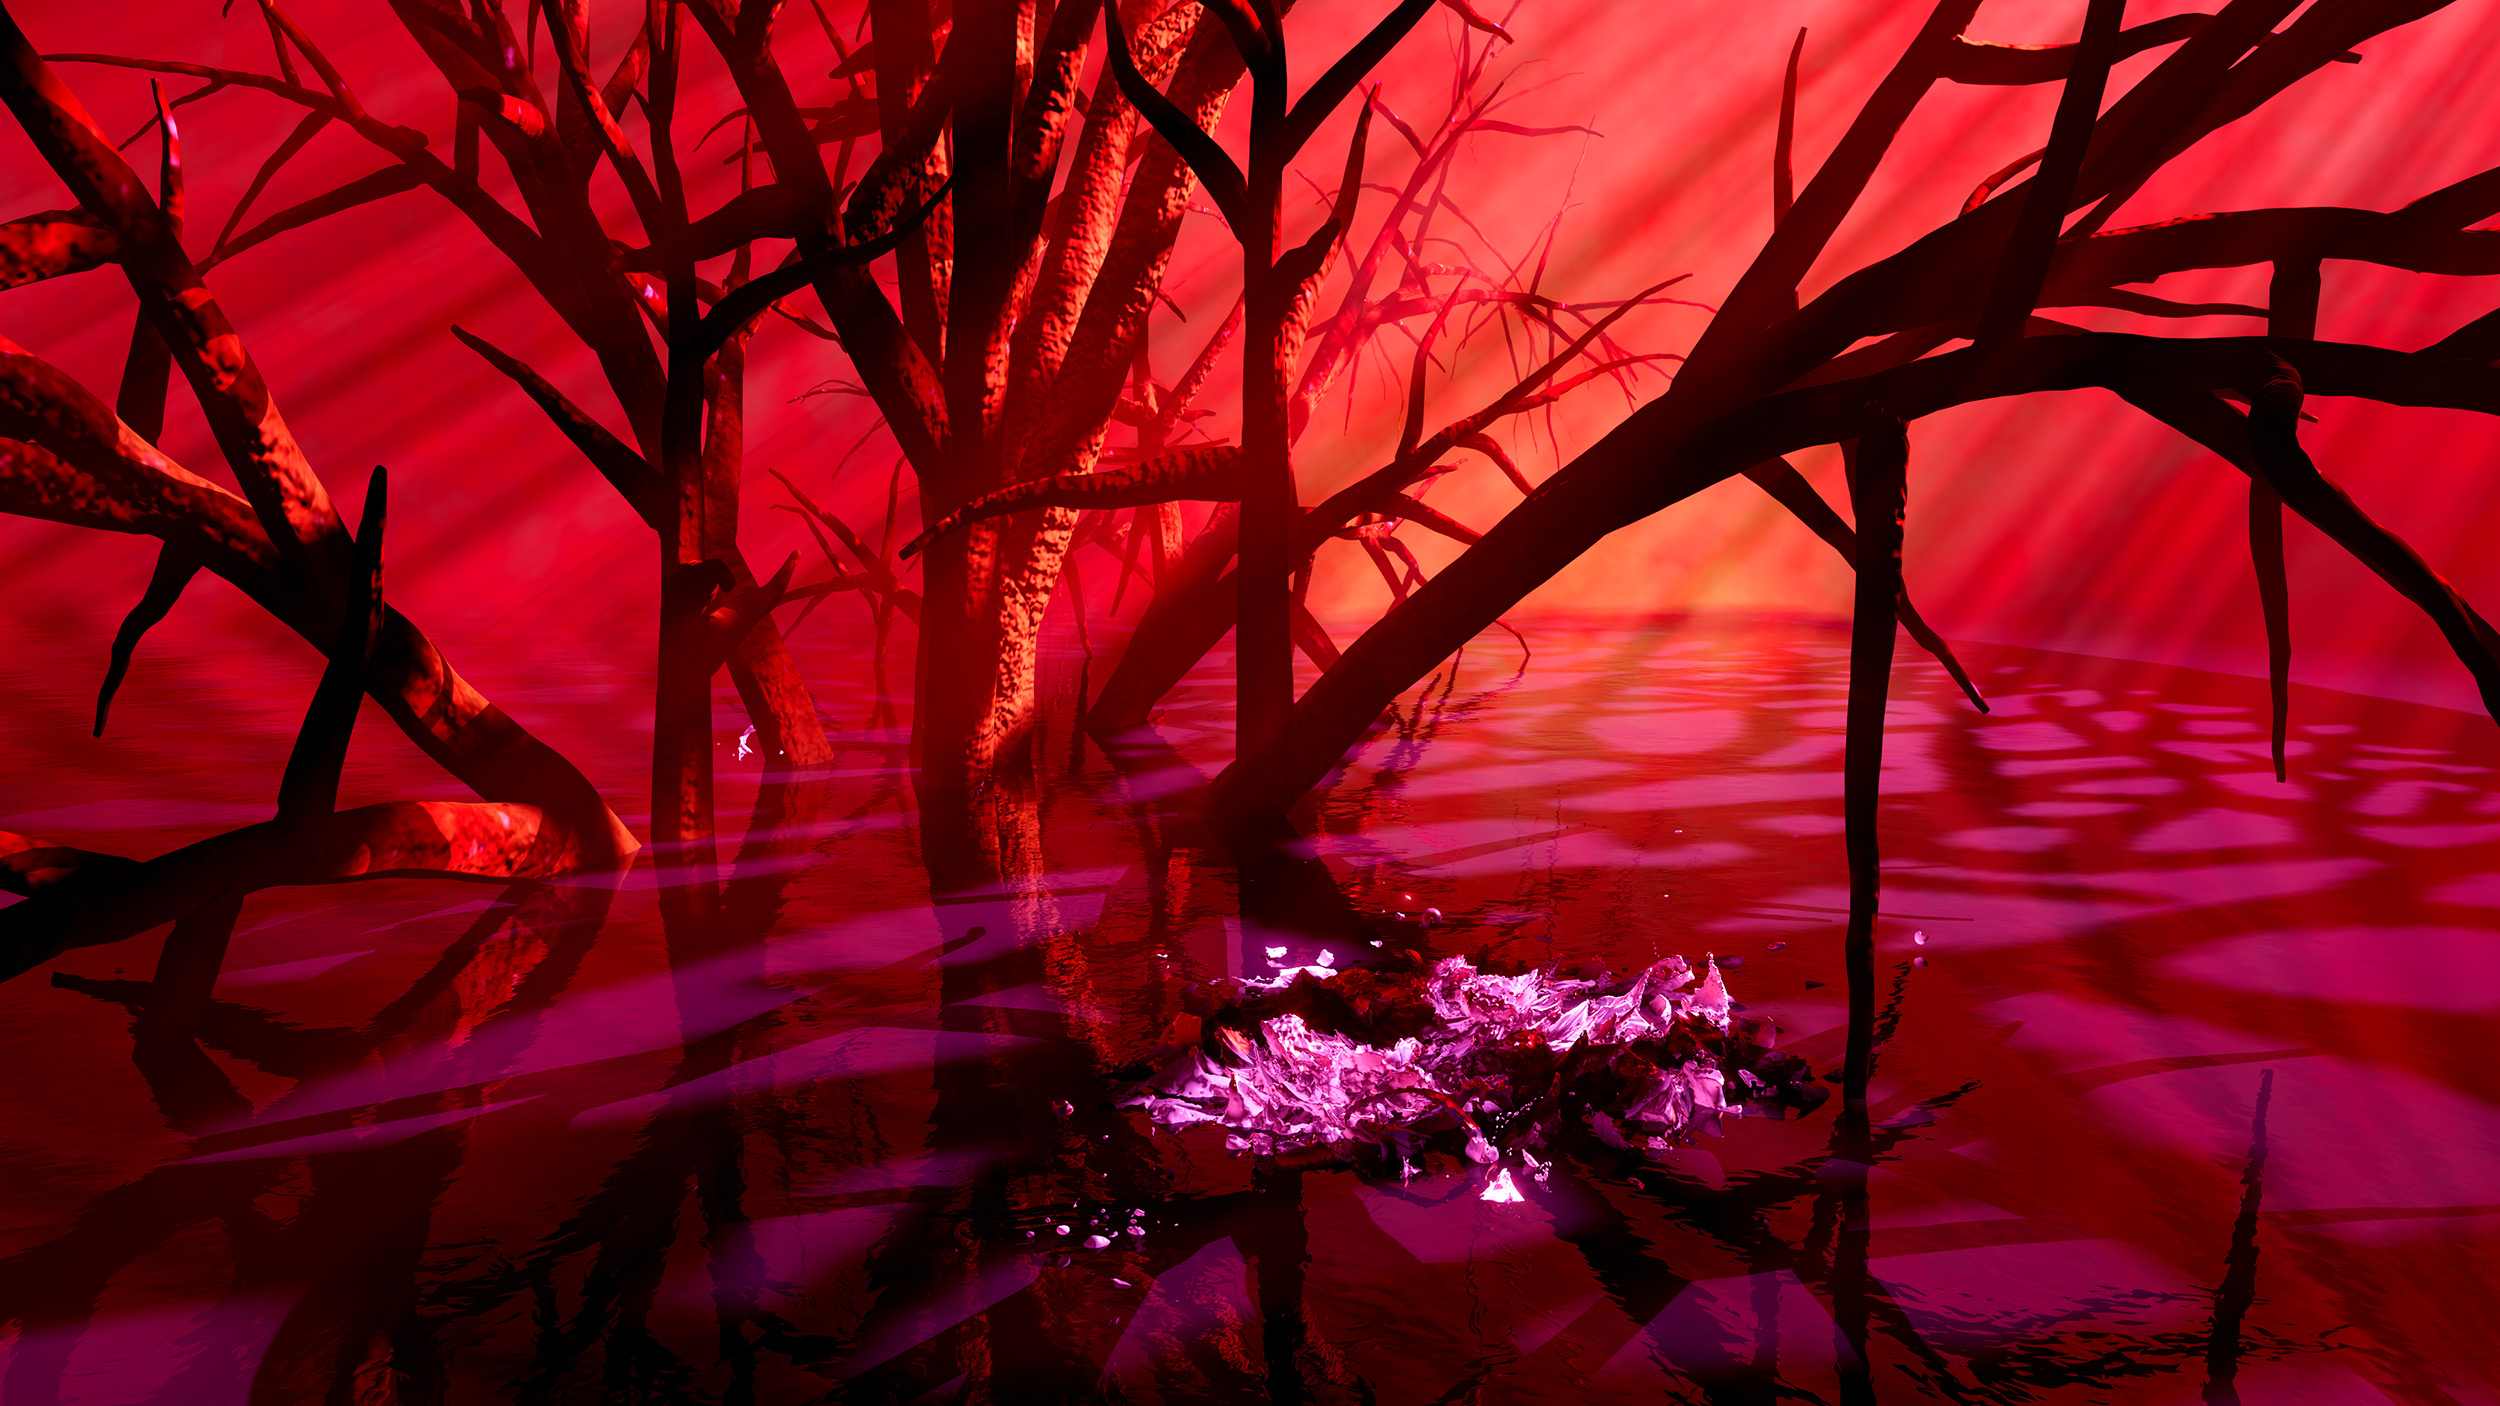 A digital landscape of a swamp, where dark tree trunks grow out of the surface of the water. The light and the water are rendered in shades of red and violet